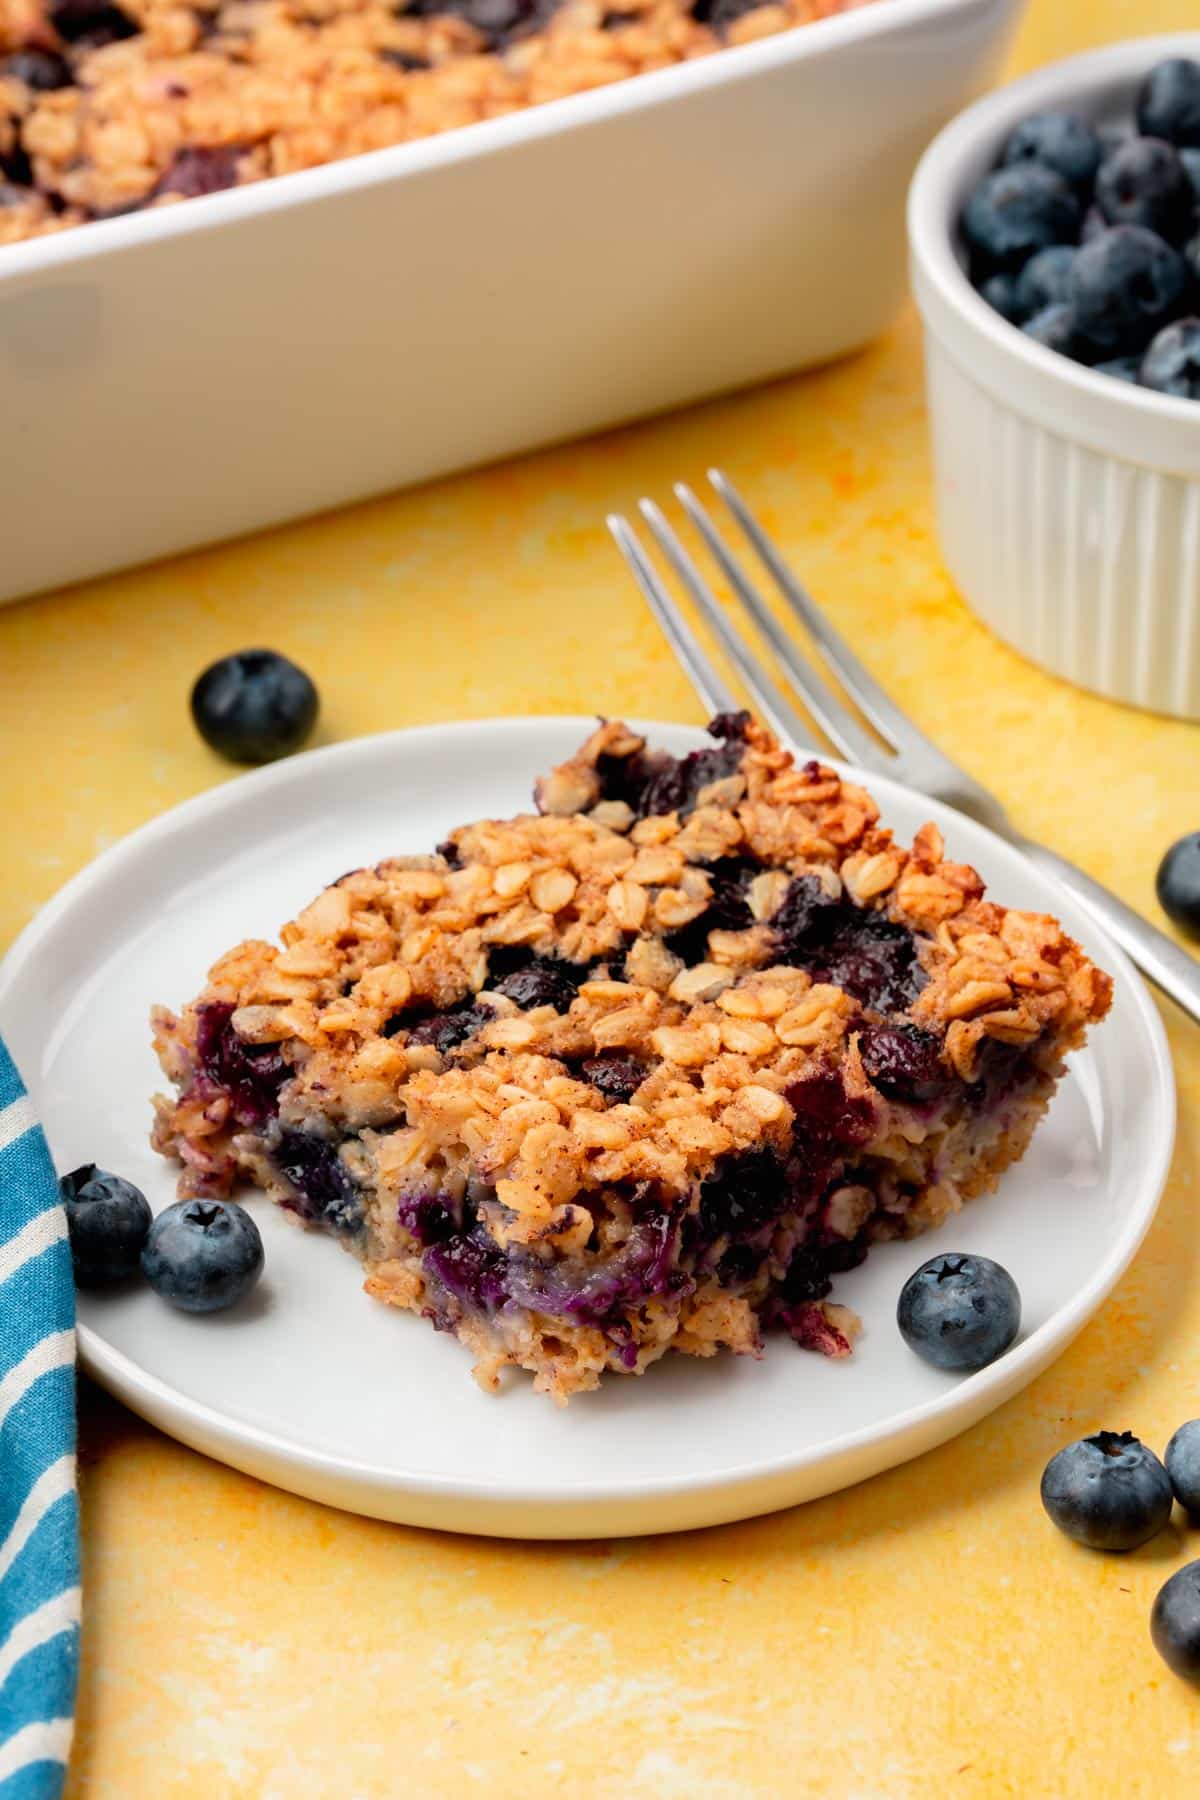 A square of blueberry baked oatmeal on a small plate with a bowl of blueberries and a baking dish of baked oatmeal in the background.